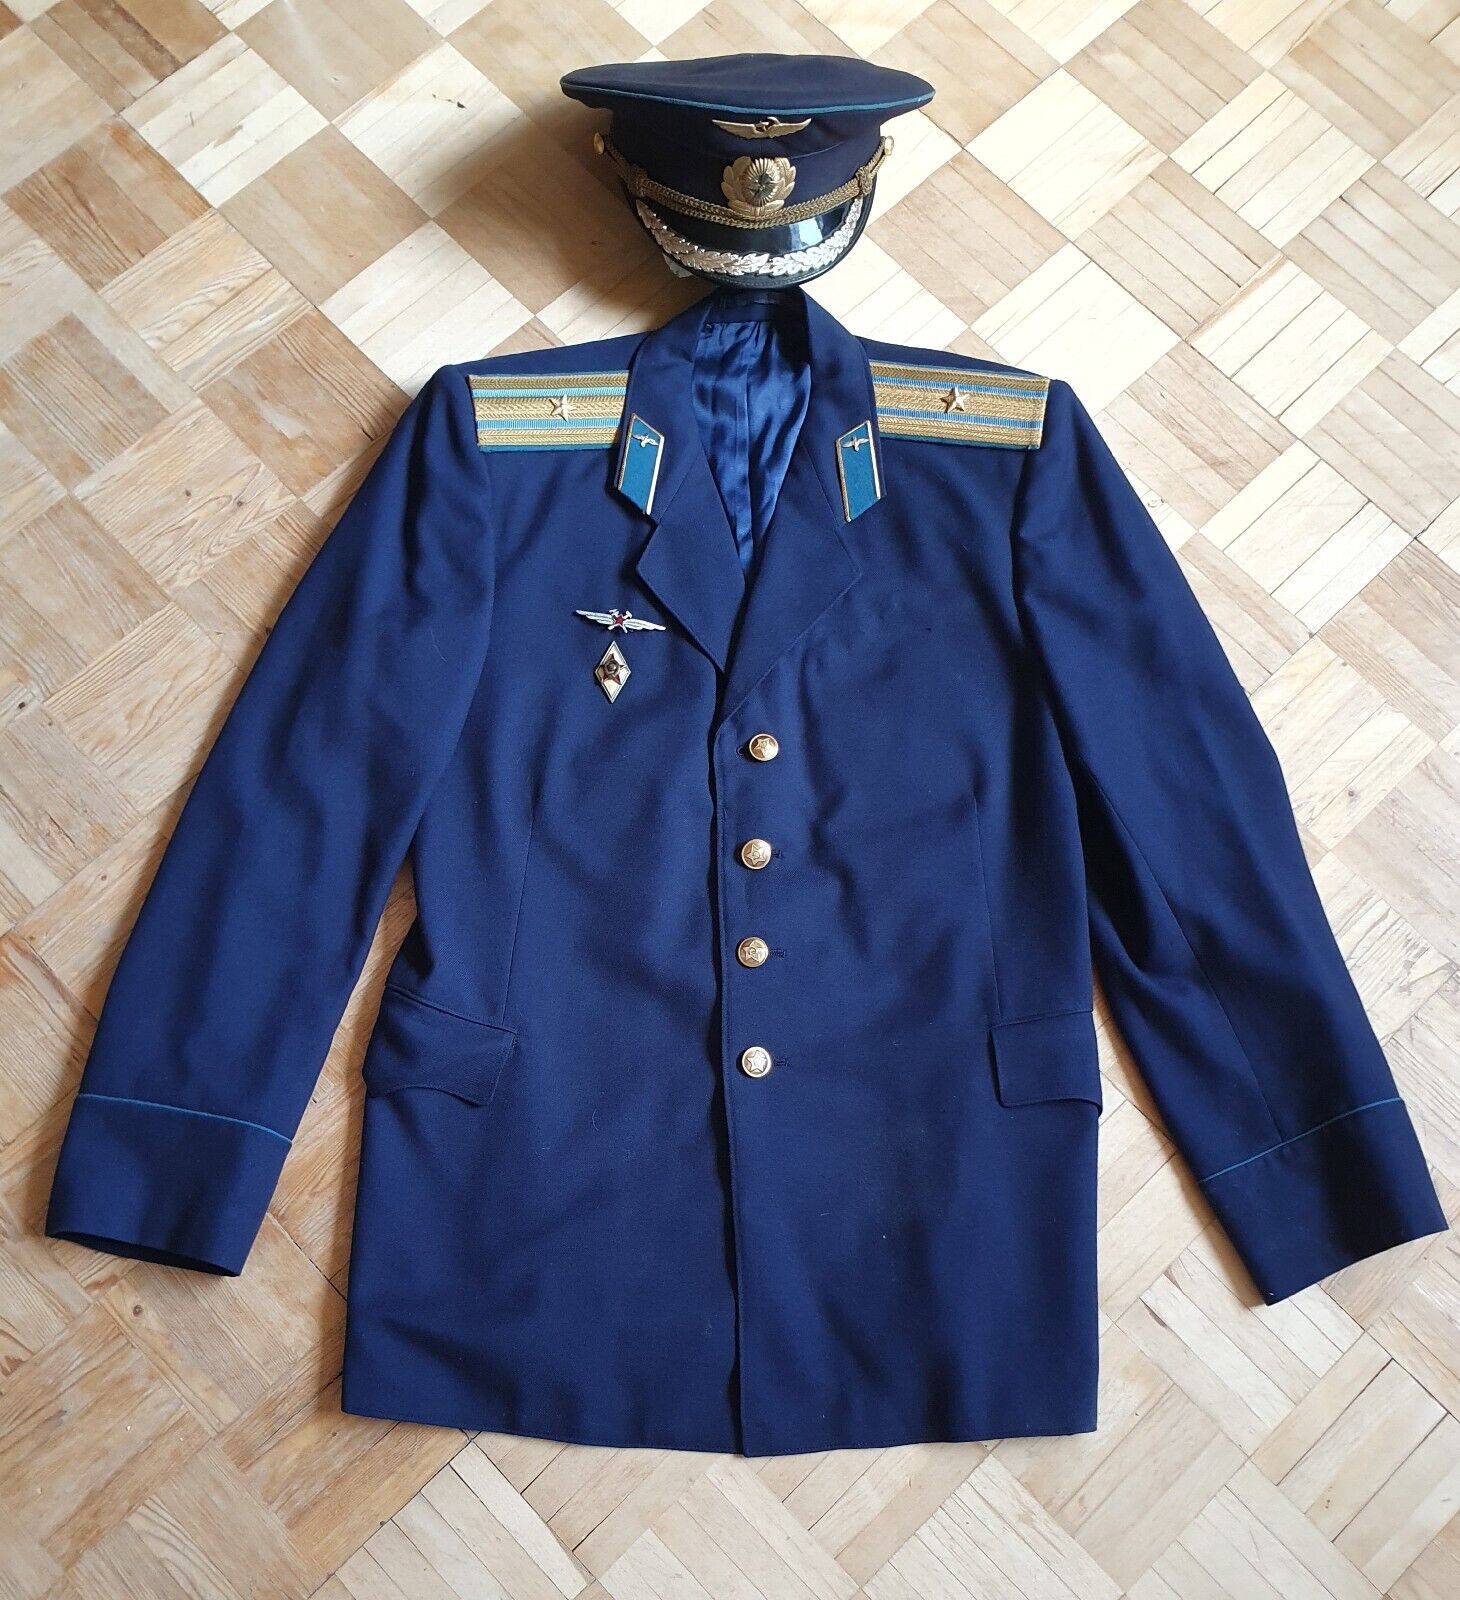 Military Uniform of the Major Air Force of USSR Parade Jacket Cap Chevrons